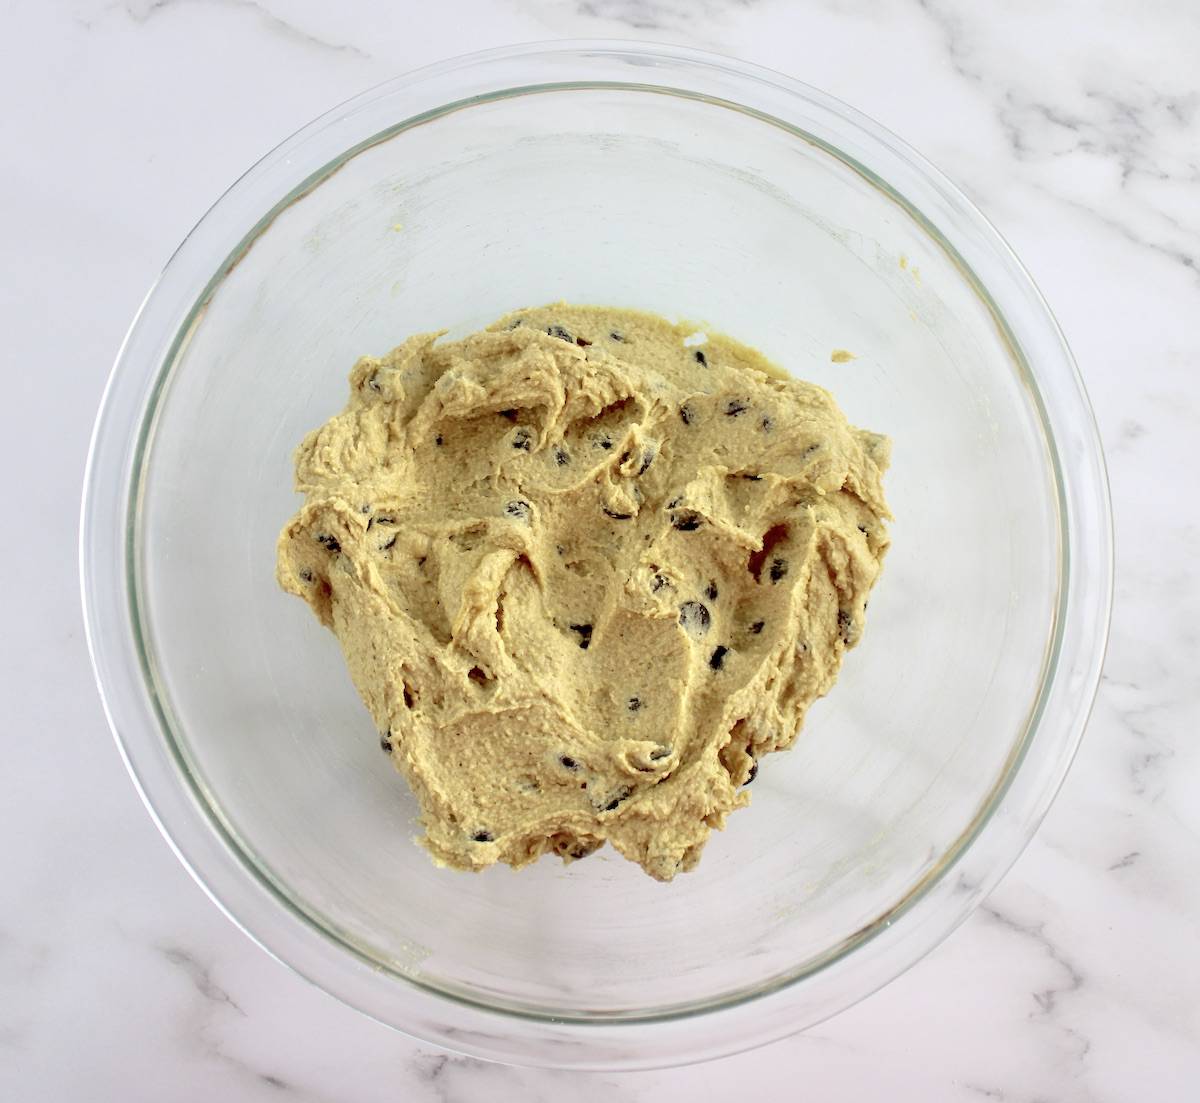 Keto Chocolate Chip Cookie dough in glass bowl